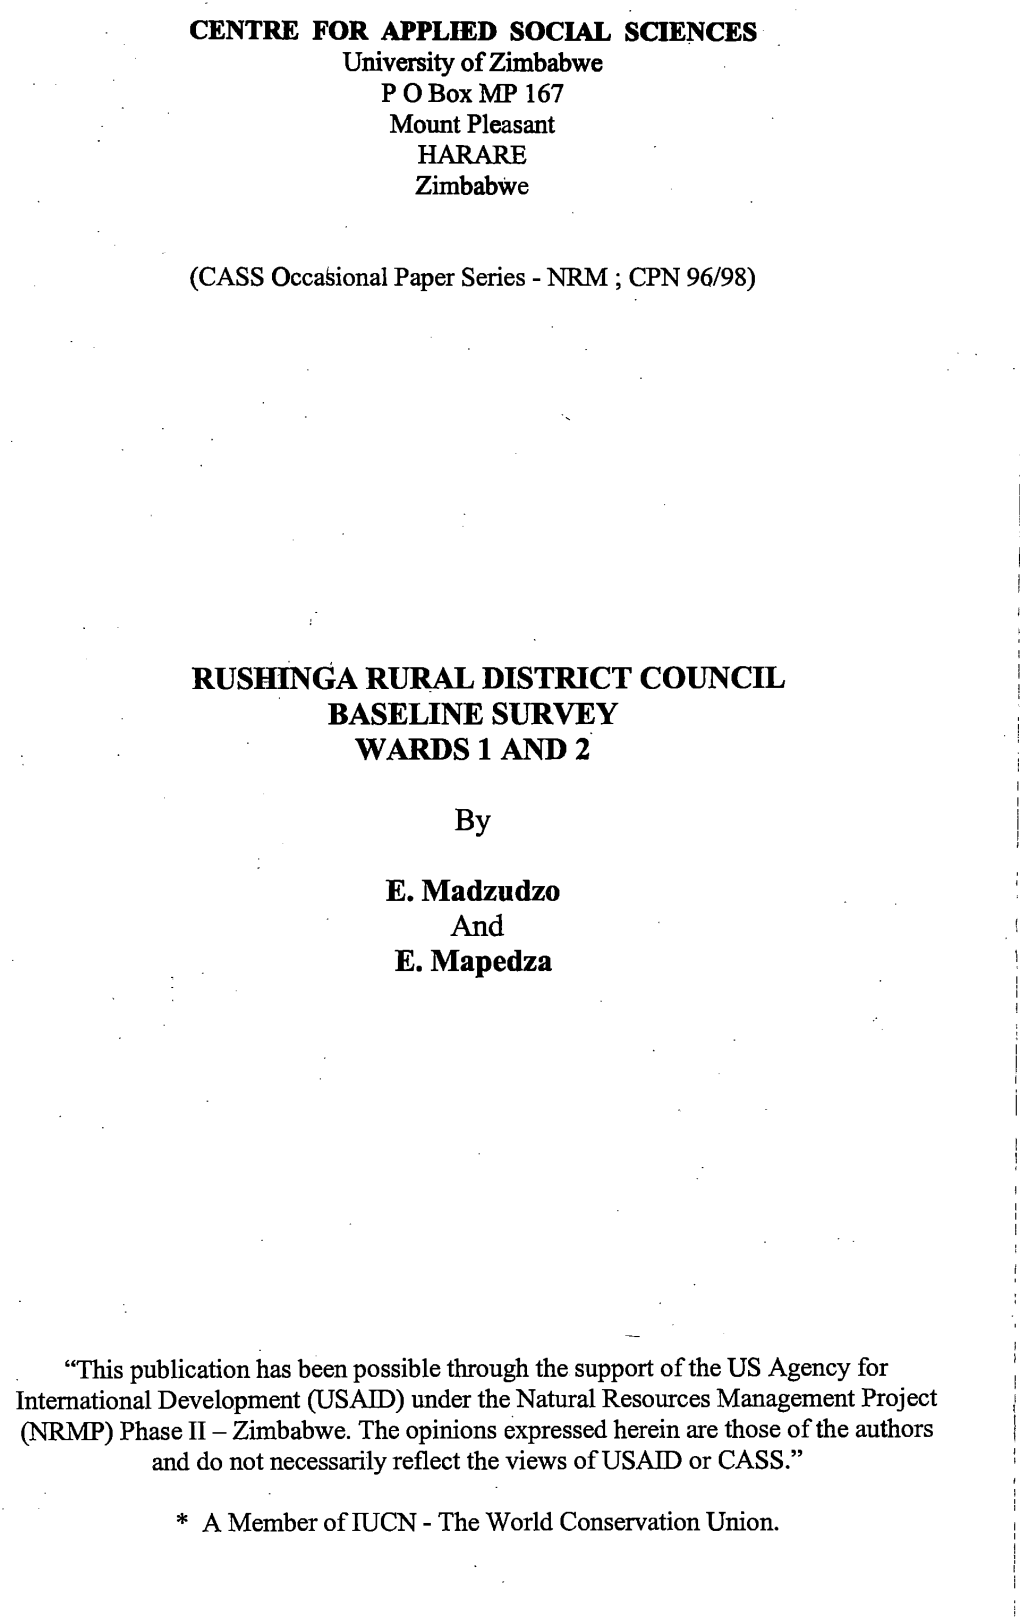 Rushinga Rural District Council Baseline Survey Wards 1 and 2